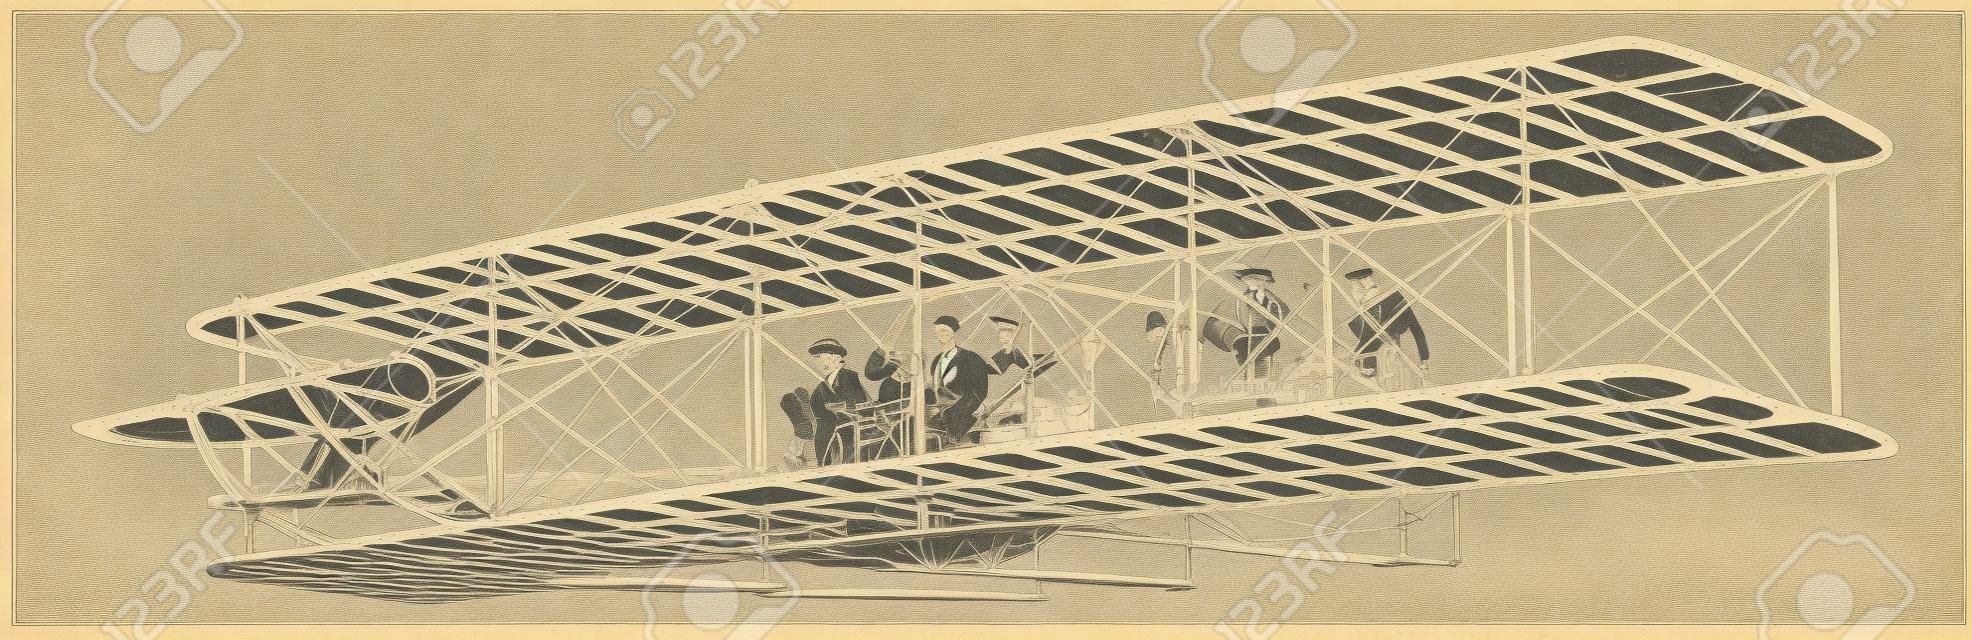 Wright Brothers Aeroplane most successful flying experiment which in 1908 made many successful ascensions, vintage line drawing or engraving illustration.